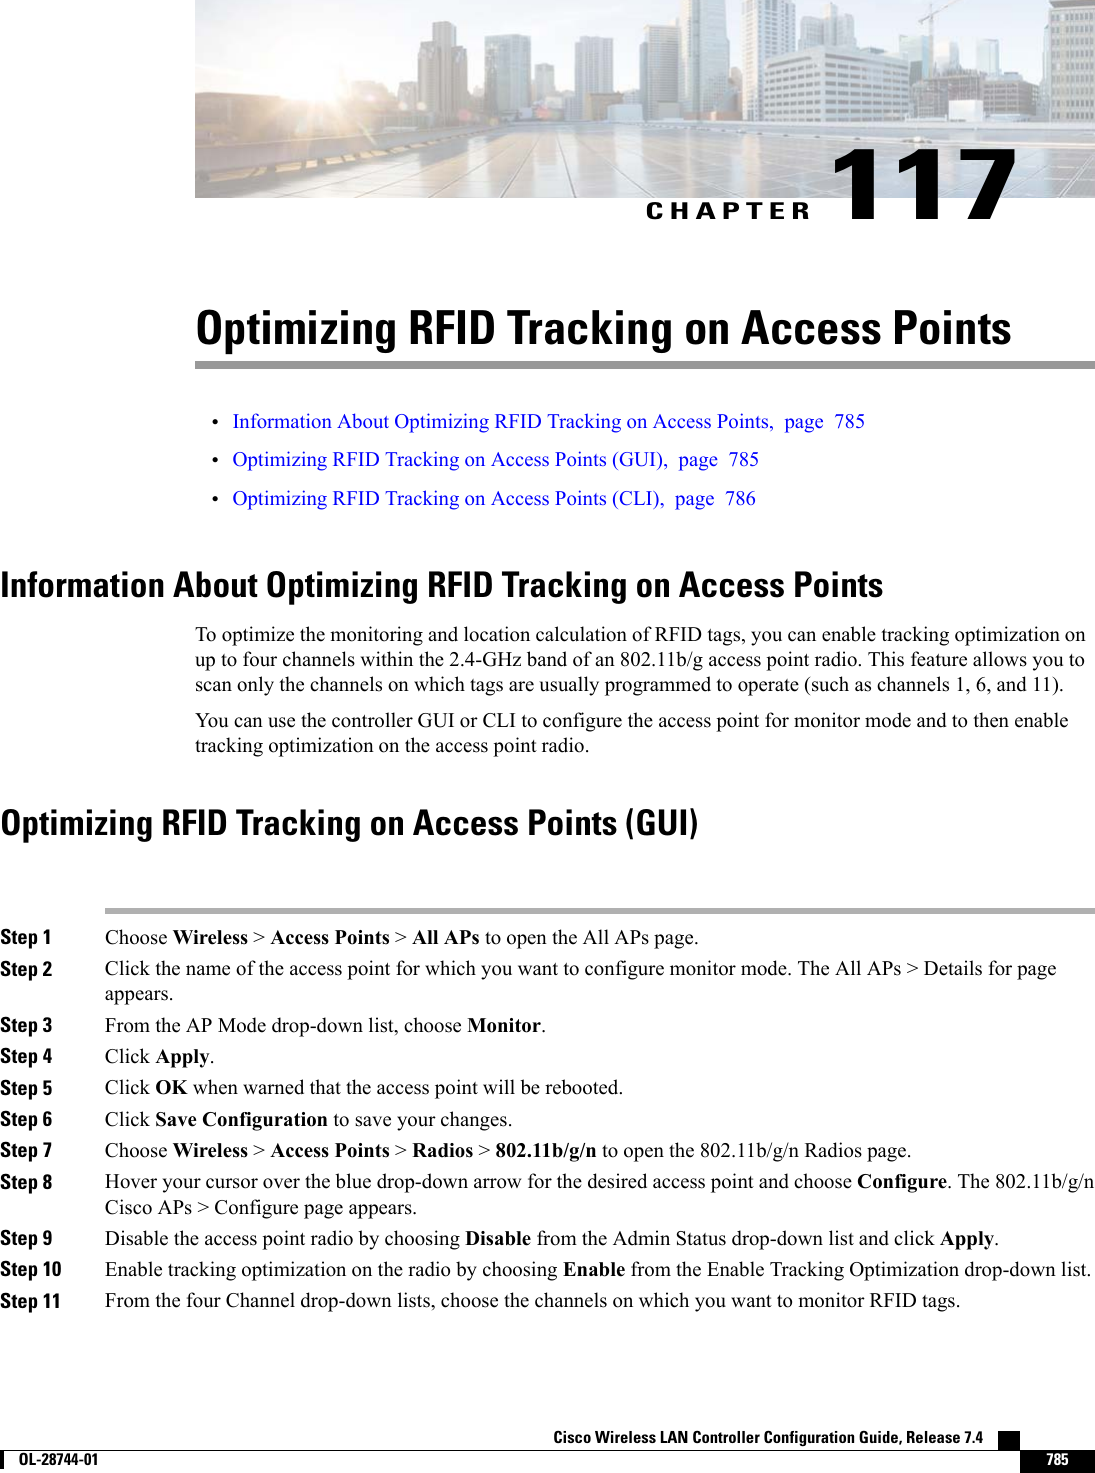 CHAPTER 117Optimizing RFID Tracking on Access Points•Information About Optimizing RFID Tracking on Access Points, page 785•Optimizing RFID Tracking on Access Points (GUI), page 785•Optimizing RFID Tracking on Access Points (CLI), page 786Information About Optimizing RFID Tracking on Access PointsTo optimize the monitoring and location calculation of RFID tags, you can enable tracking optimization onup to four channels within the 2.4-GHz band of an 802.11b/g access point radio. This feature allows you toscan only the channels on which tags are usually programmed to operate (such as channels 1, 6, and 11).You can use the controller GUI or CLI to configure the access point for monitor mode and to then enabletracking optimization on the access point radio.Optimizing RFID Tracking on Access Points (GUI)Step 1 Choose Wireless &gt;Access Points &gt;All APs to open the All APs page.Step 2 Click the name of the access point for which you want to configure monitor mode. The All APs &gt; Details for pageappears.Step 3 From the AP Mode drop-down list, choose Monitor.Step 4 Click Apply.Step 5 Click OK when warned that the access point will be rebooted.Step 6 Click Save Configuration to save your changes.Step 7 Choose Wireless &gt;Access Points &gt;Radios &gt;802.11b/g/n to open the 802.11b/g/n Radios page.Step 8 Hover your cursor over the blue drop-down arrow for the desired access point and choose Configure. The 802.11b/g/nCisco APs &gt; Configure page appears.Step 9 Disable the access point radio by choosing Disable from the Admin Status drop-down list and click Apply.Step 10 Enable tracking optimization on the radio by choosing Enable from the Enable Tracking Optimization drop-down list.Step 11 From the four Channel drop-down lists, choose the channels on which you want to monitor RFID tags.Cisco Wireless LAN Controller Configuration Guide, Release 7.4        OL-28744-01 785